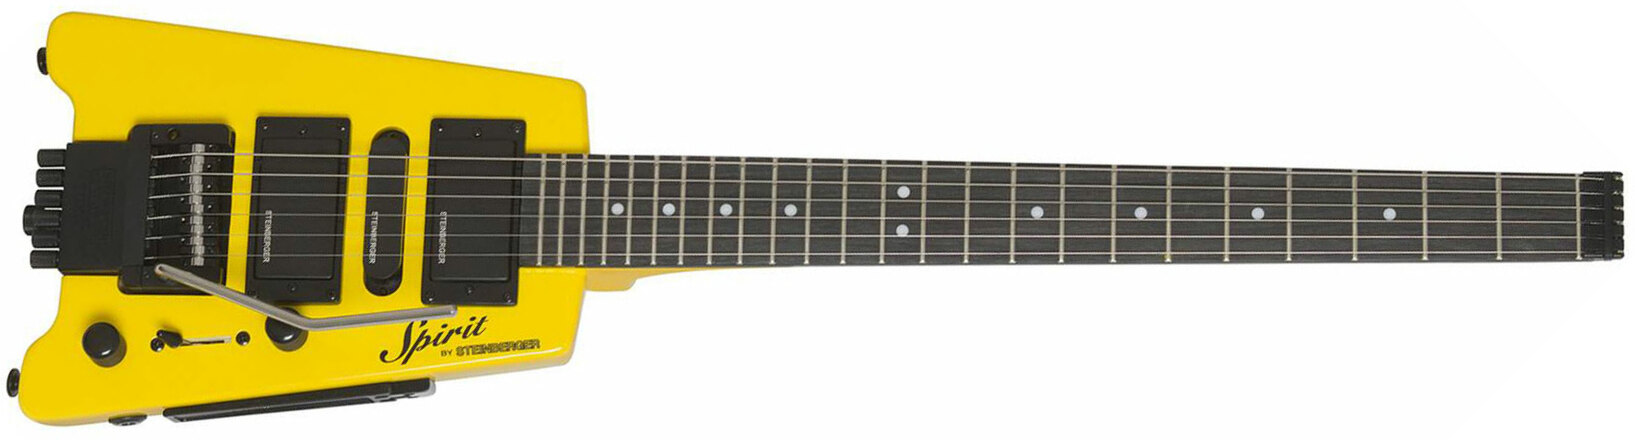 Steinberger Gt-pro Deluxe Outfit Hsh Trem Rw +housse - Hot Rod Yellow - Guitare Électrique Voyage - Main picture